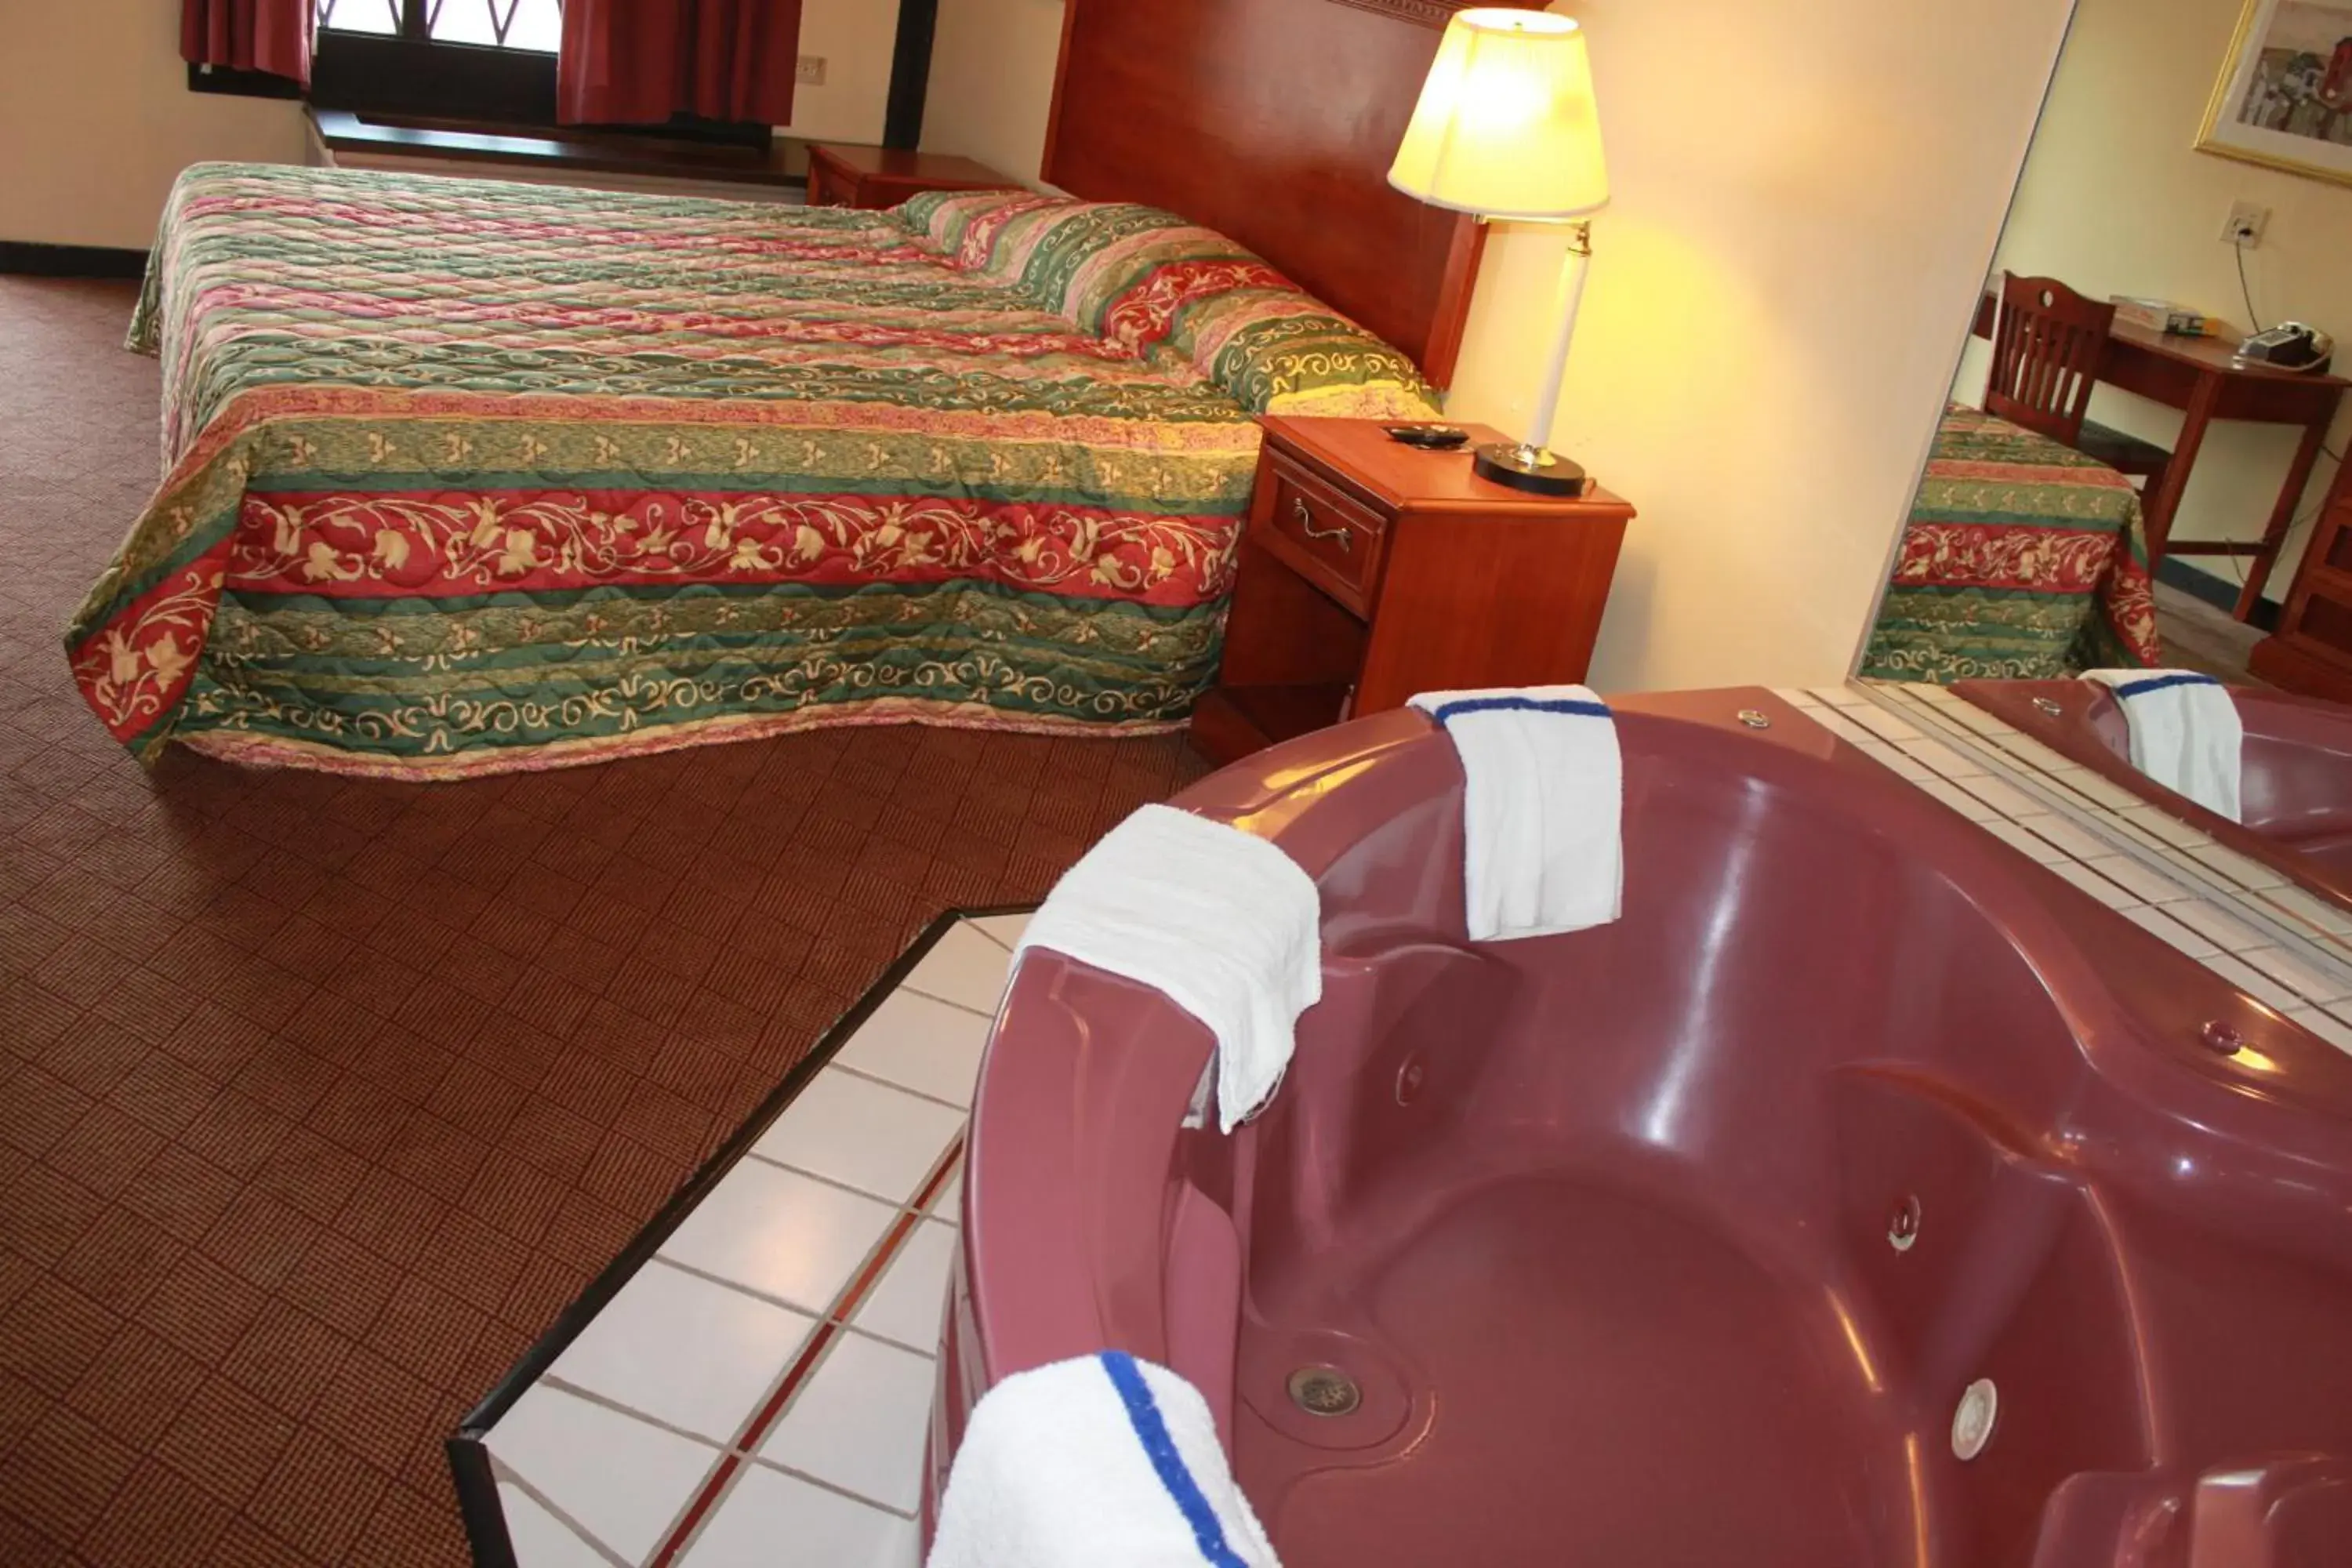 Hot Tub, Bed in Knights Inn Indianapolis